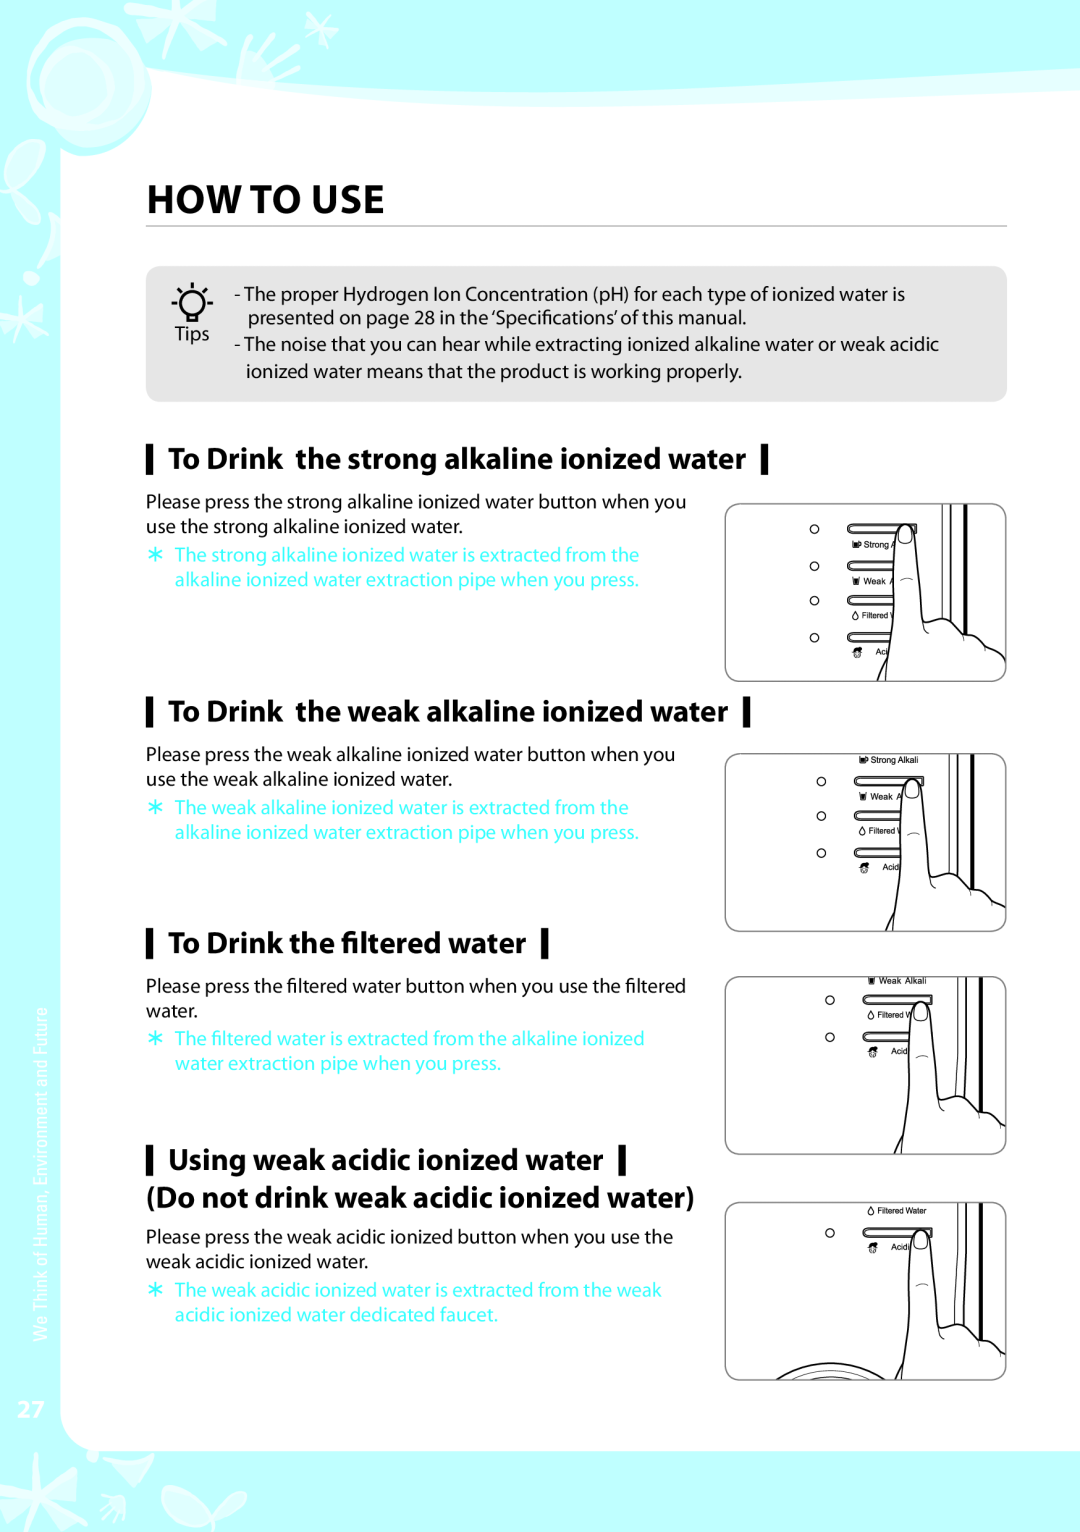 Coway EW-07GU warranty How to use, To Drink the strong alkaline ionized water, To Drink the weak alkaline ionized water 